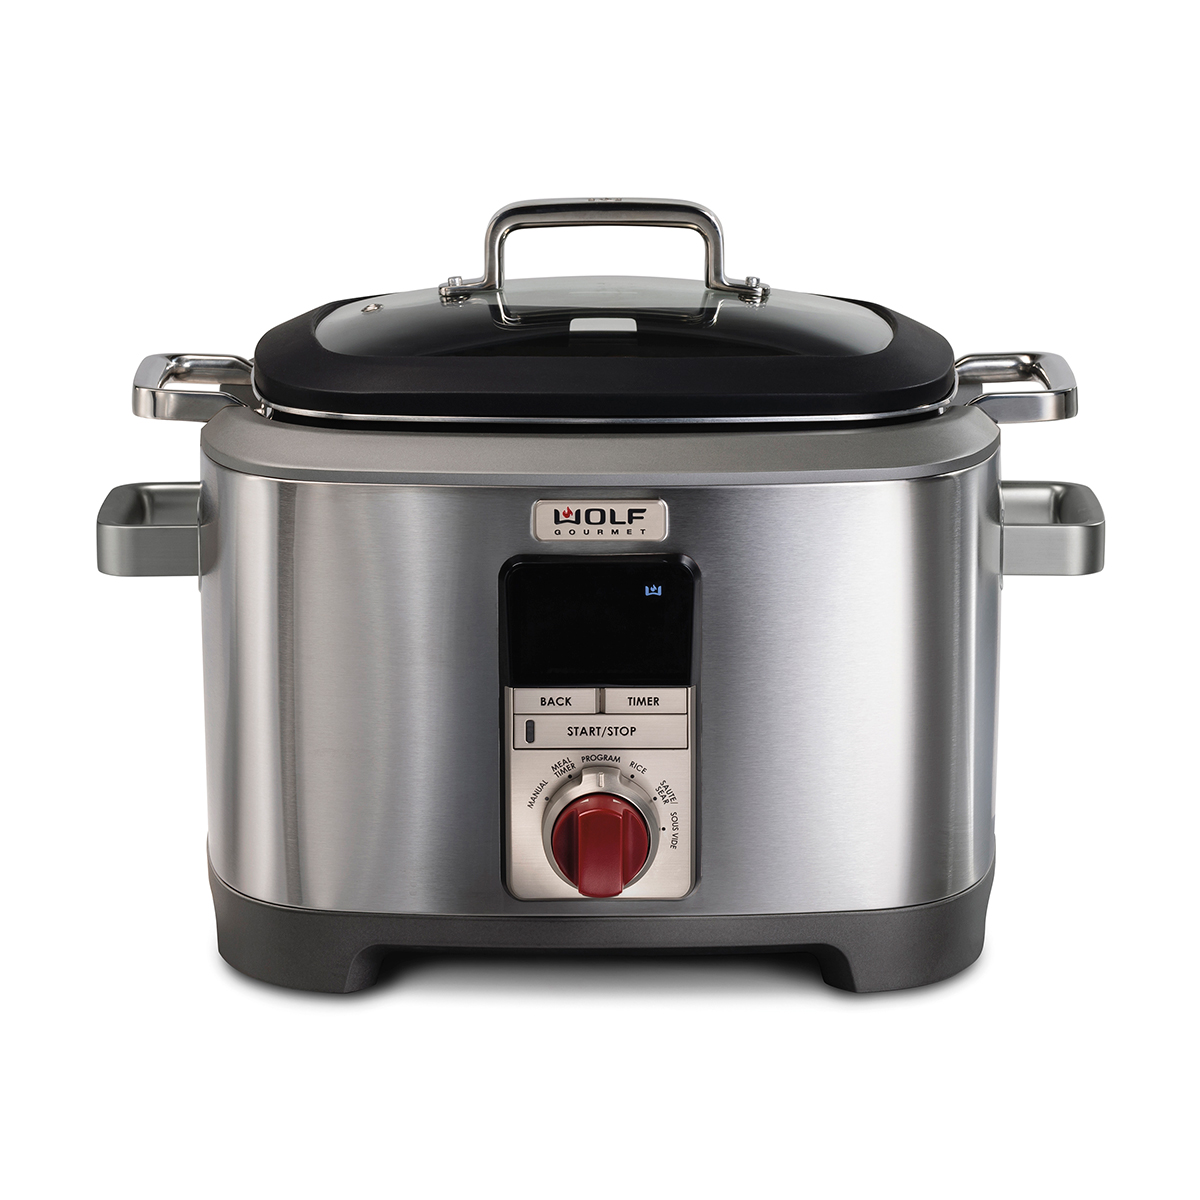 All-in-1 Multi-Function Cooker – Canada